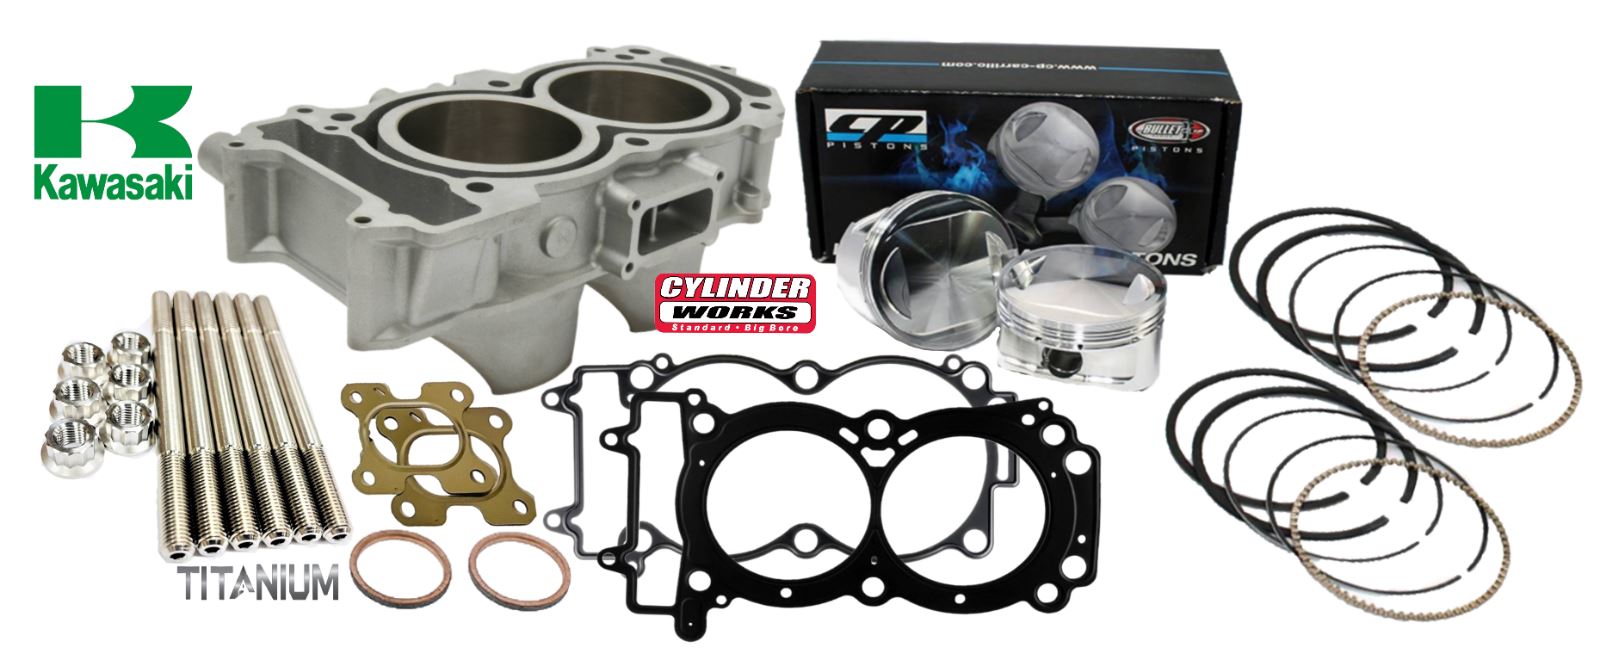 KRF1000 Teryx KRX 1000 Top End Rebuild Kit Replacement Cylinder Pistons Assembly